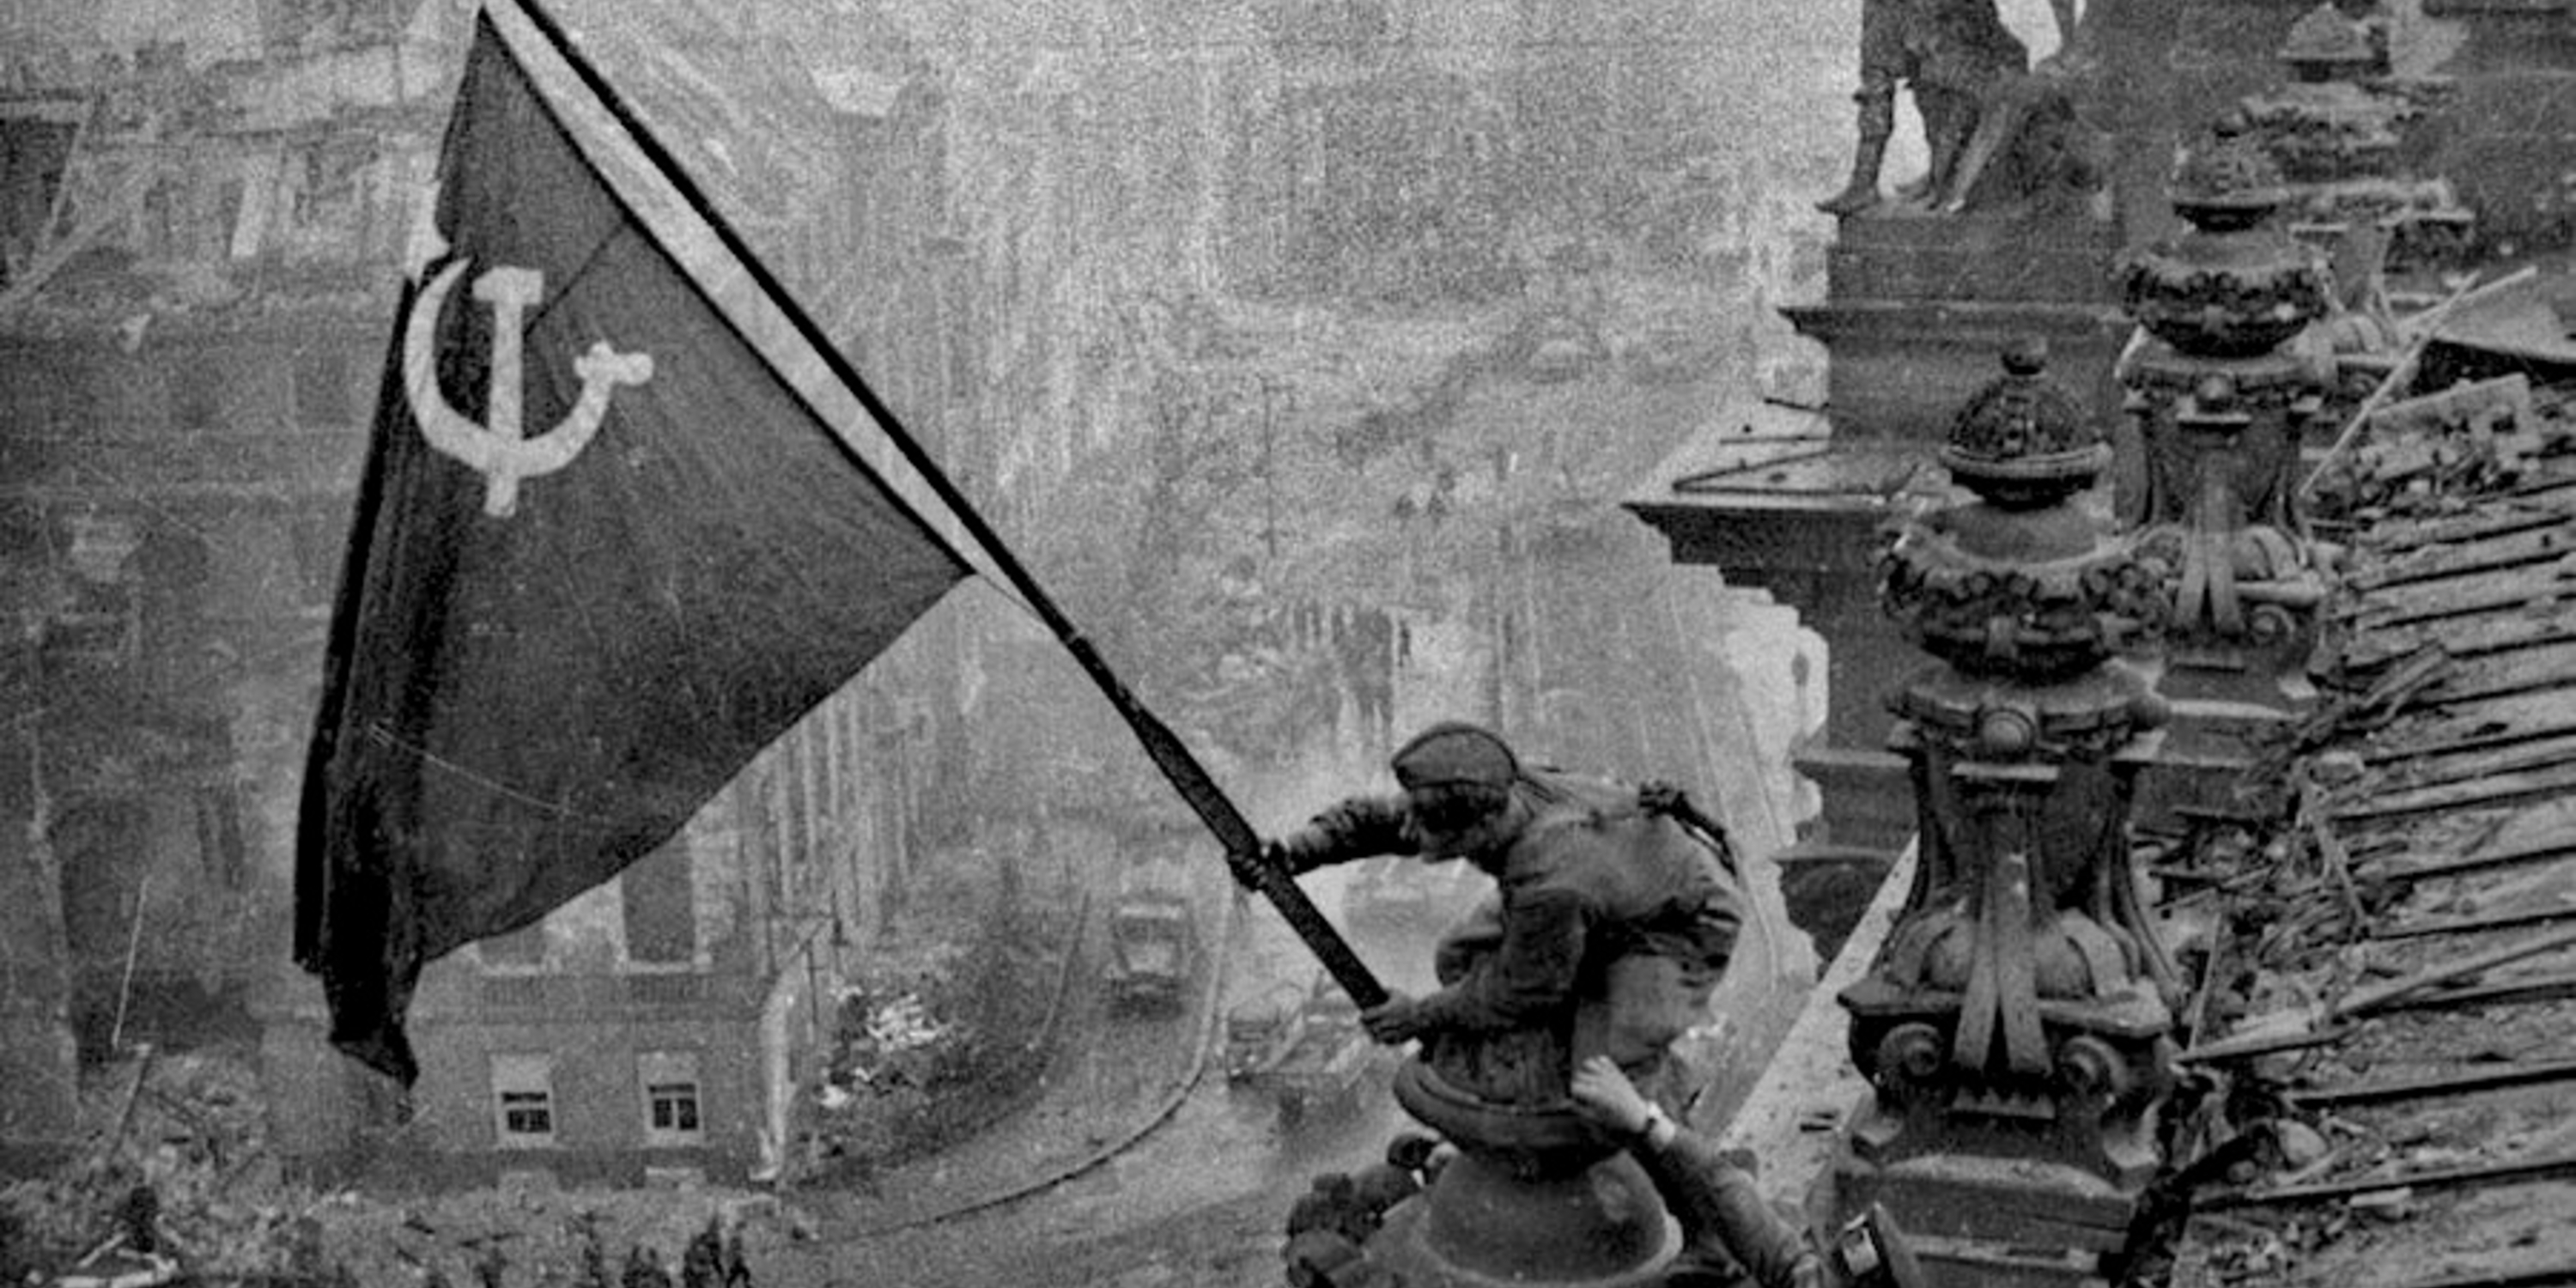 Raising a Flag over the Reichstag by Yevgeny Khaldei (1945).